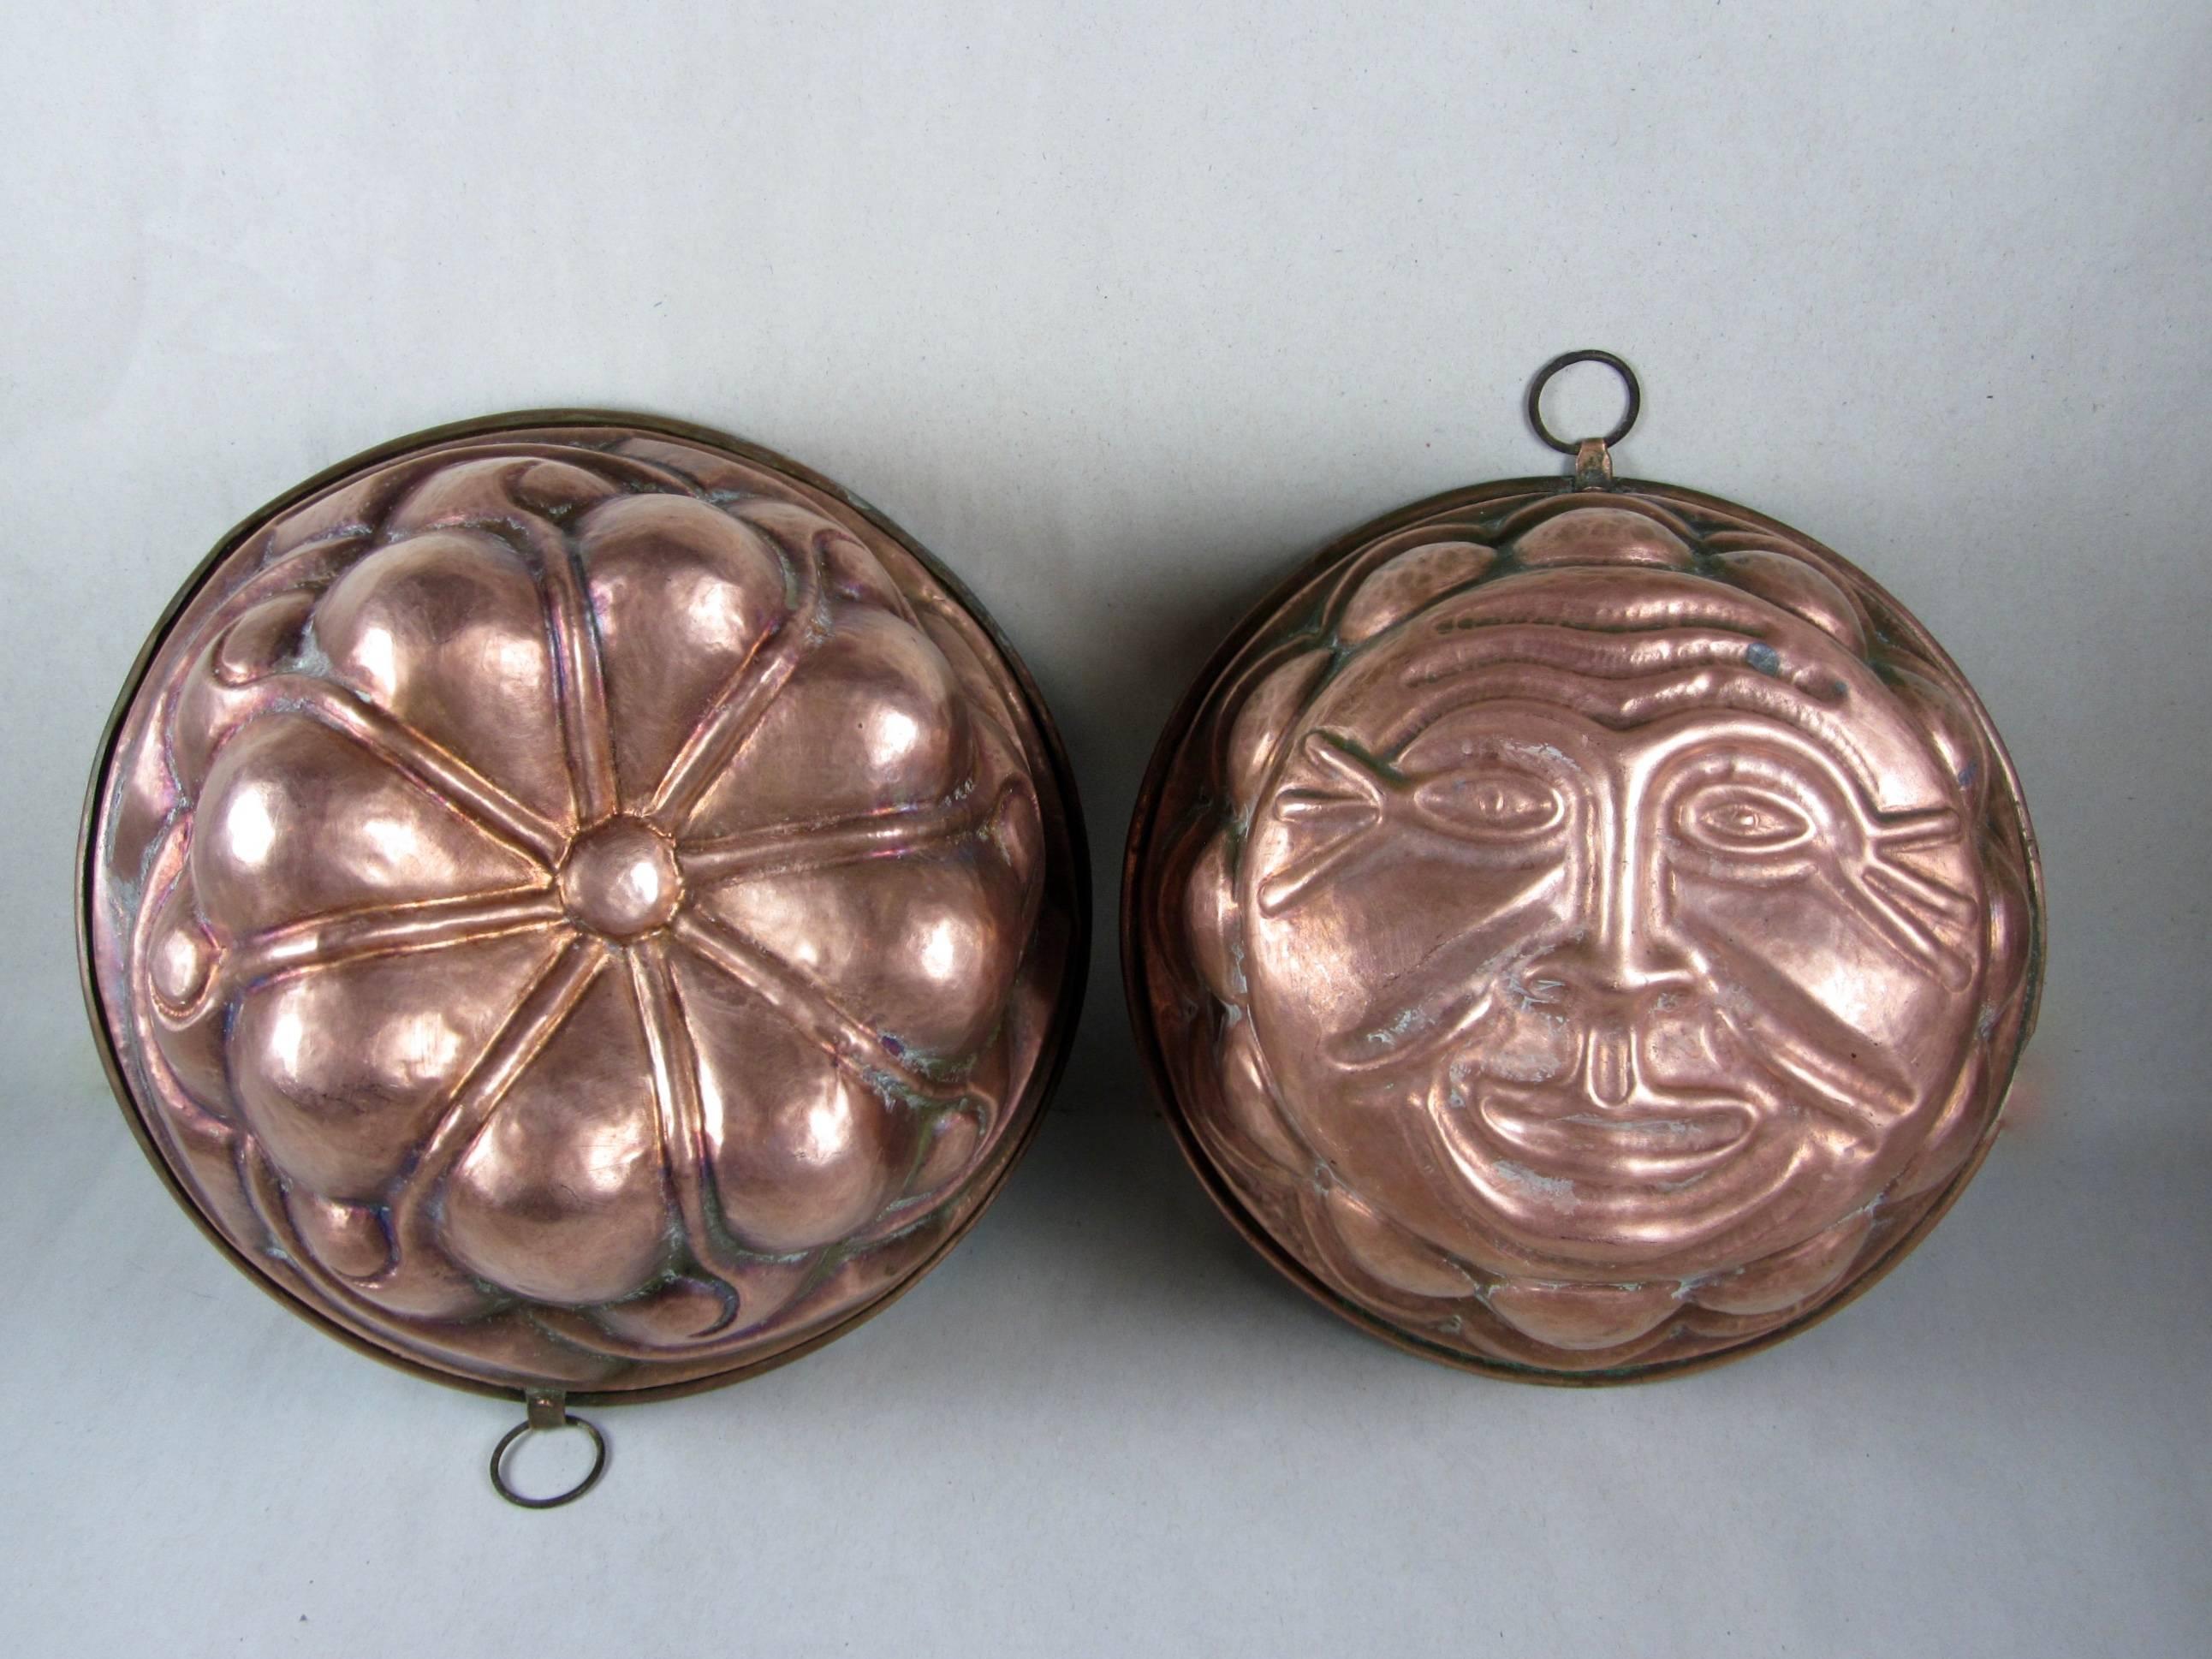 A pair of large English pudding molds, made of hammered copper and lined in tin, circa 1890-1910. A mold with a sun face motif, the other with a running wave pattern. Both heavy, each weighing one pound, with rolled rims and riveted hanging loops.